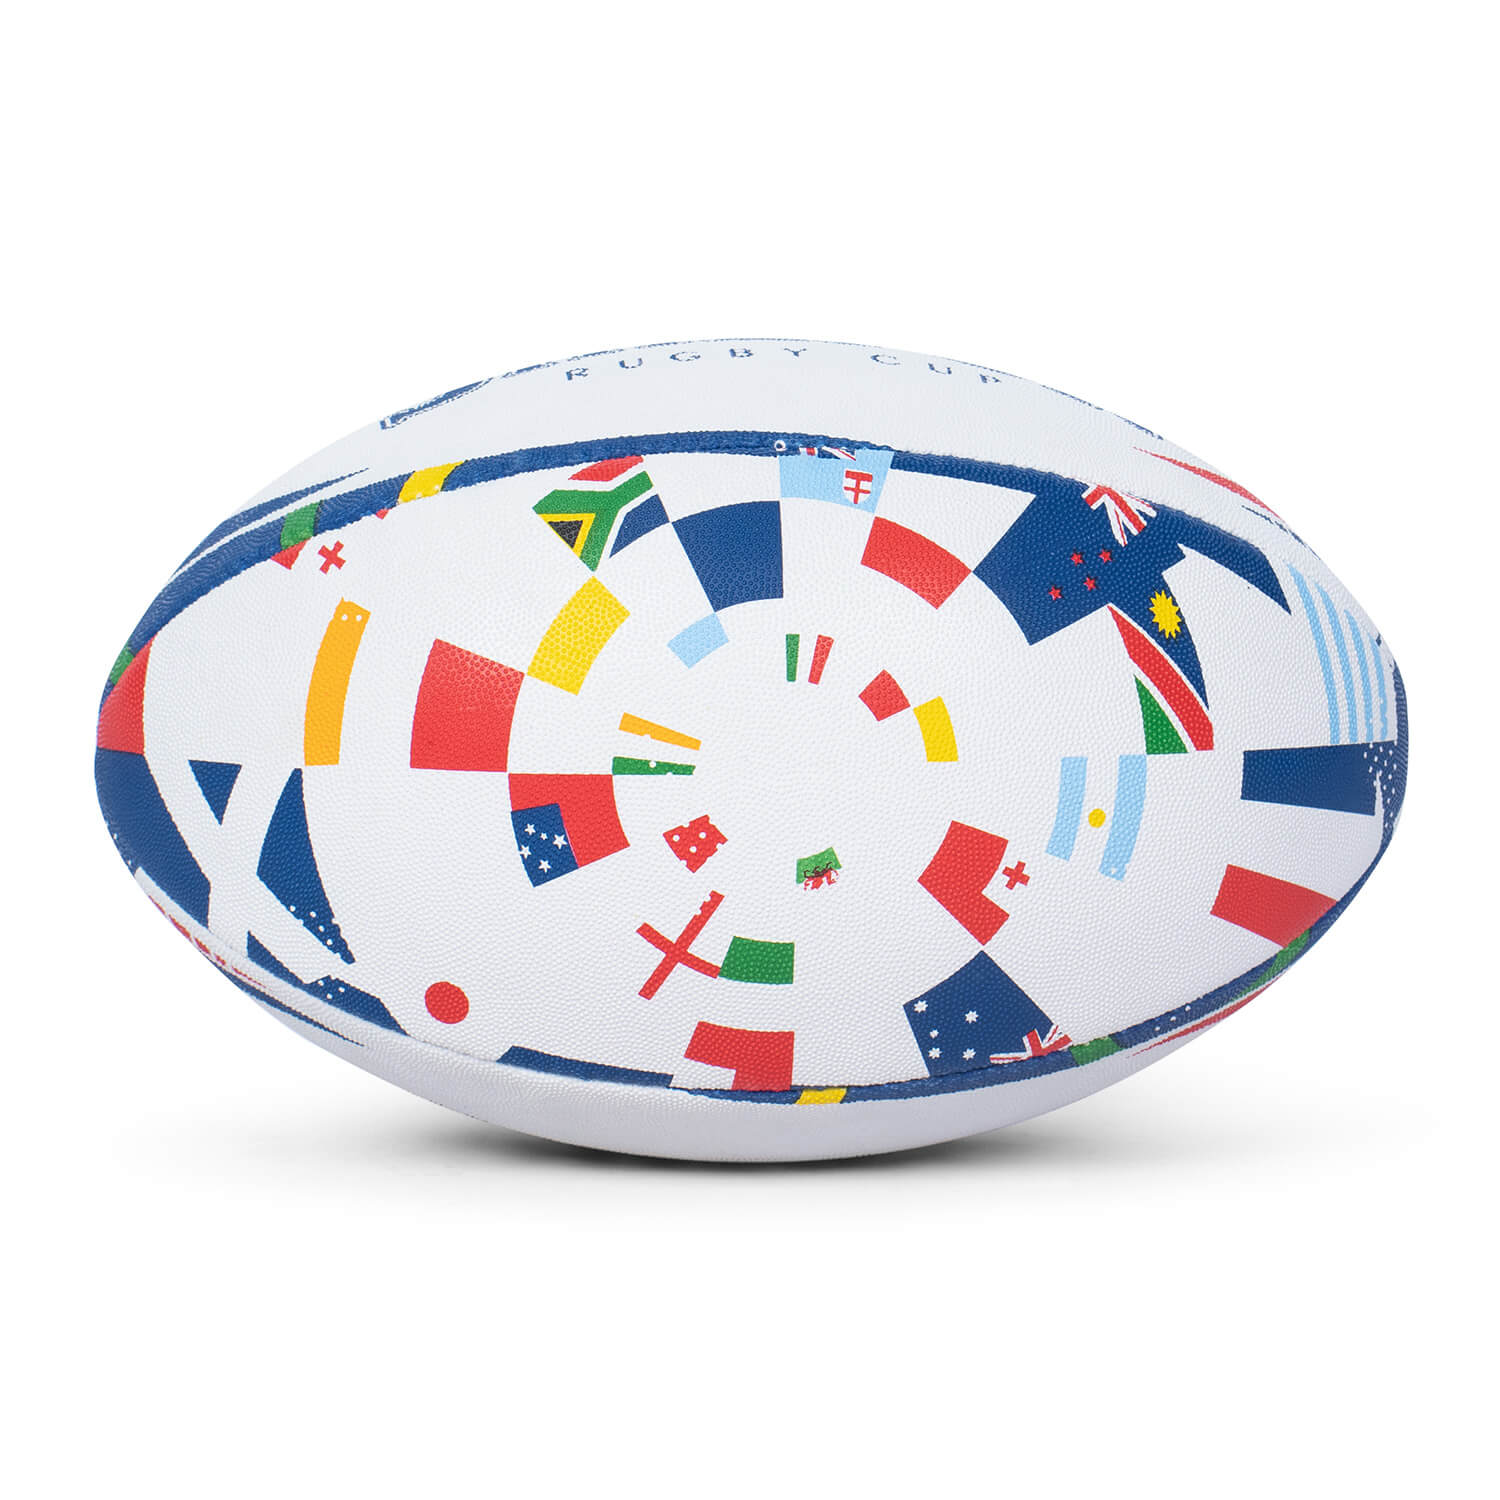 Ballon rugby nations